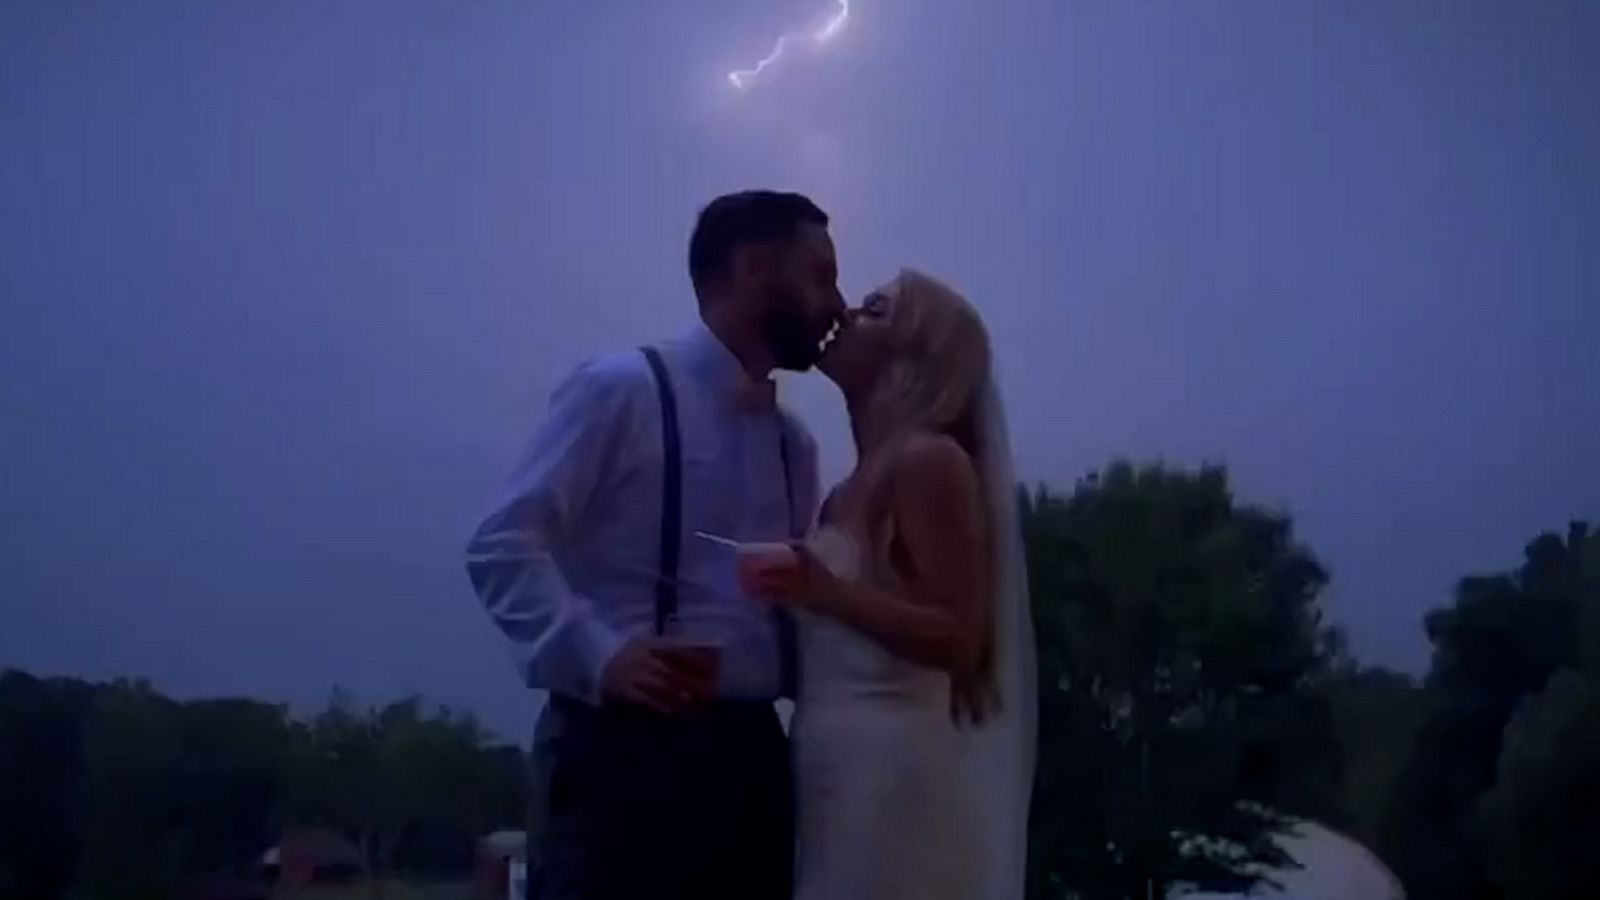 VIDEO: Newlyweds ecstatic about stormy wedding photos